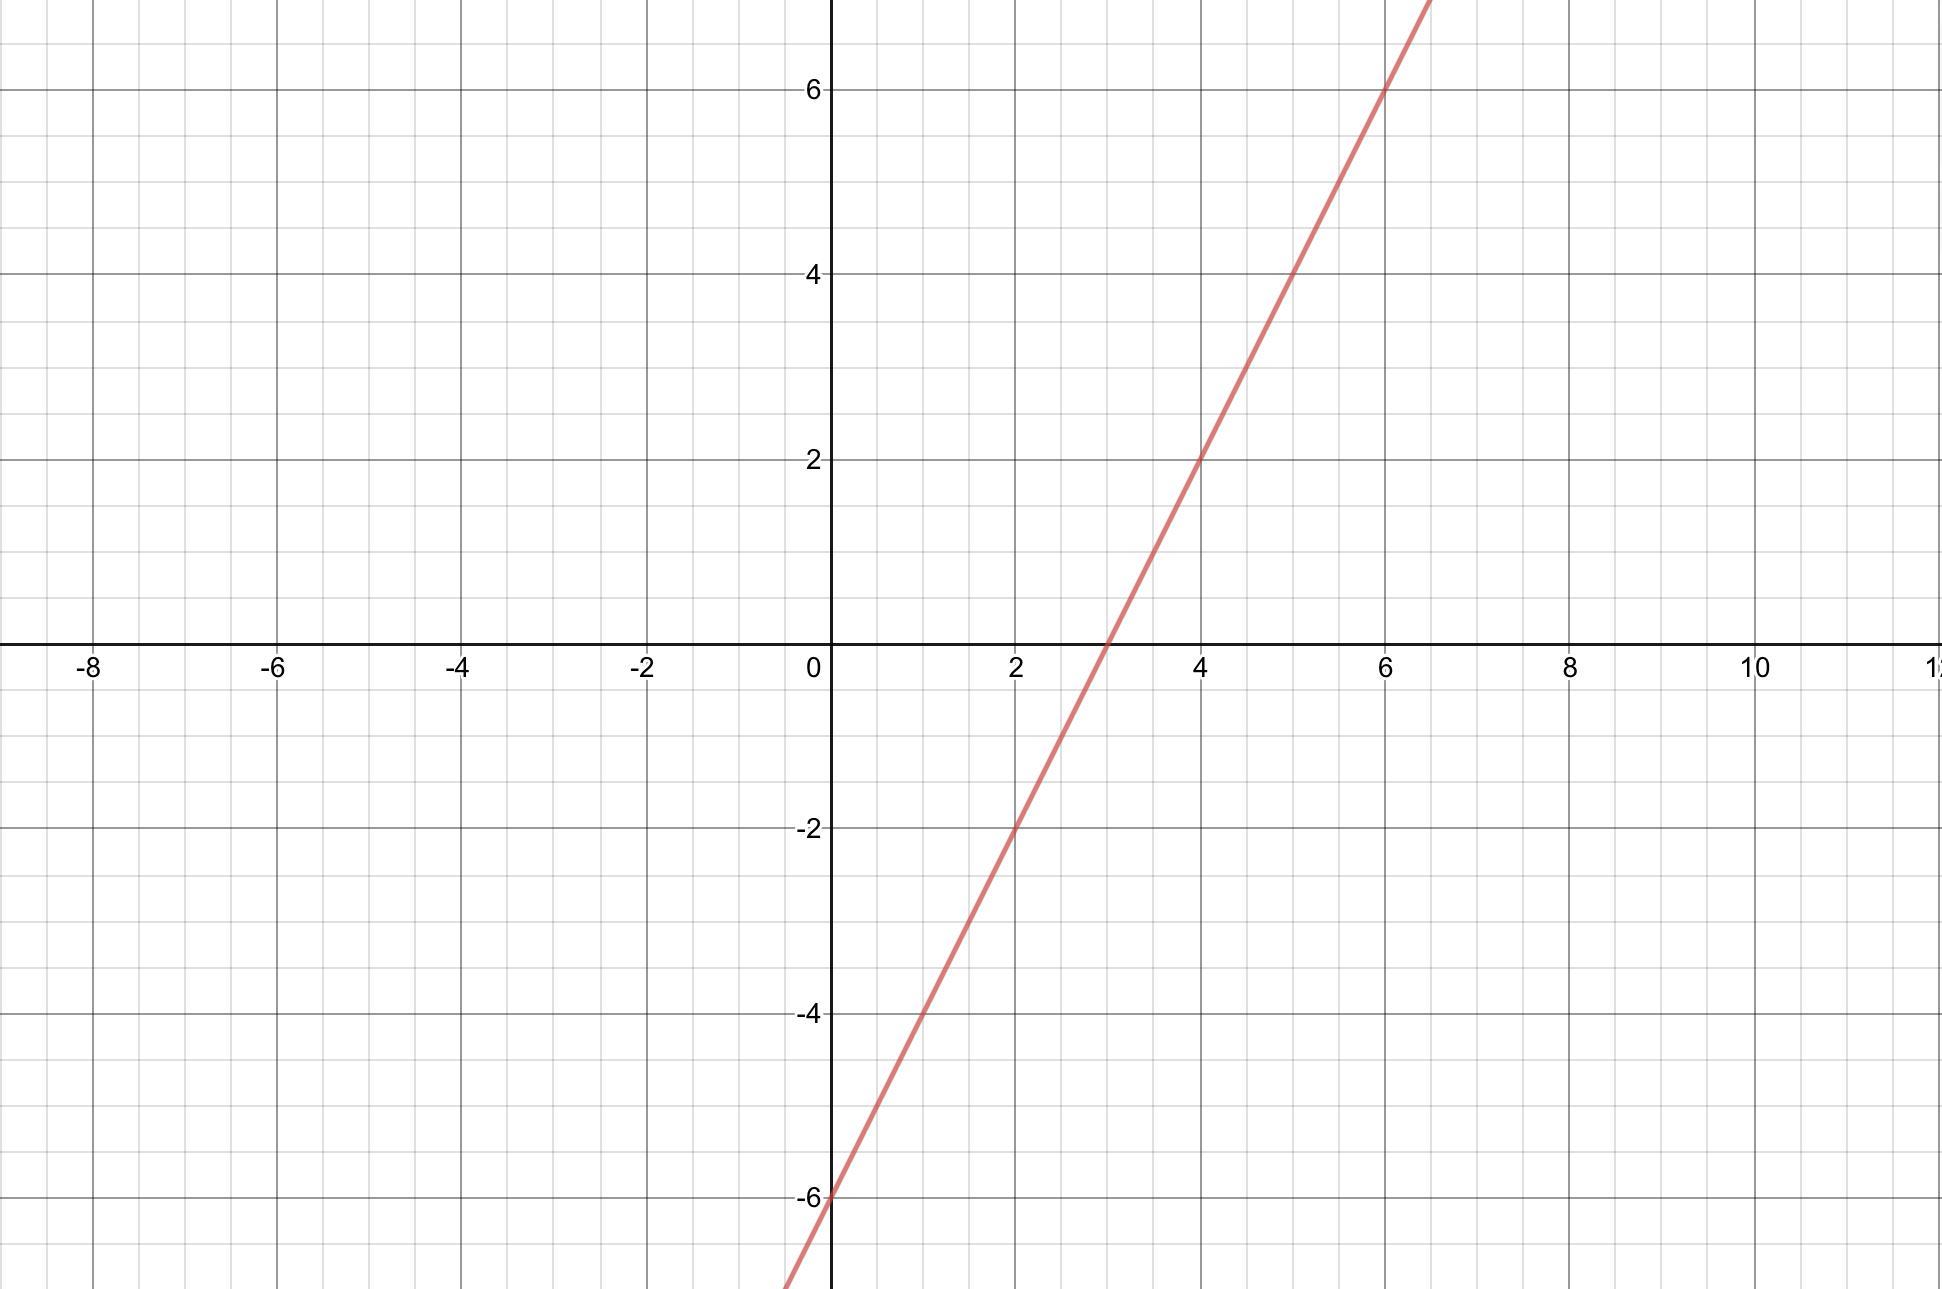 Solve The System Of Equations By Graphing Then Write The Solution Y=2x -6 HELP I HAVE 10 MINUTES TO FINISH